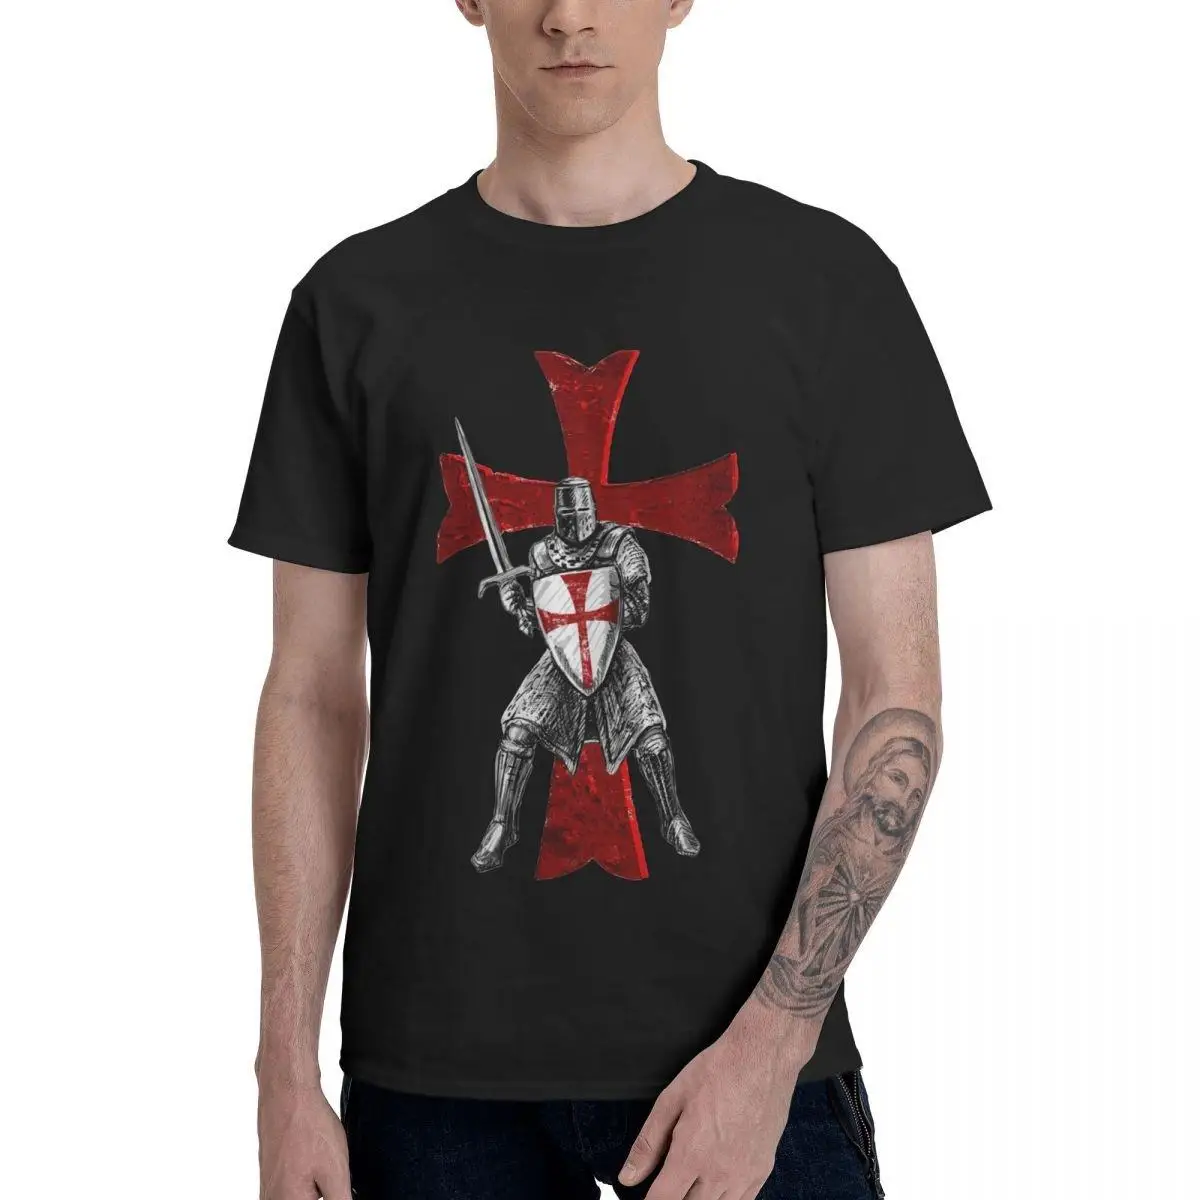 

Knights Templar Holding A Sword And A Shield Men's T Shirts Hipster Tee Shirt Short Sleeve T-Shirts Cotton Gift Idea Tops